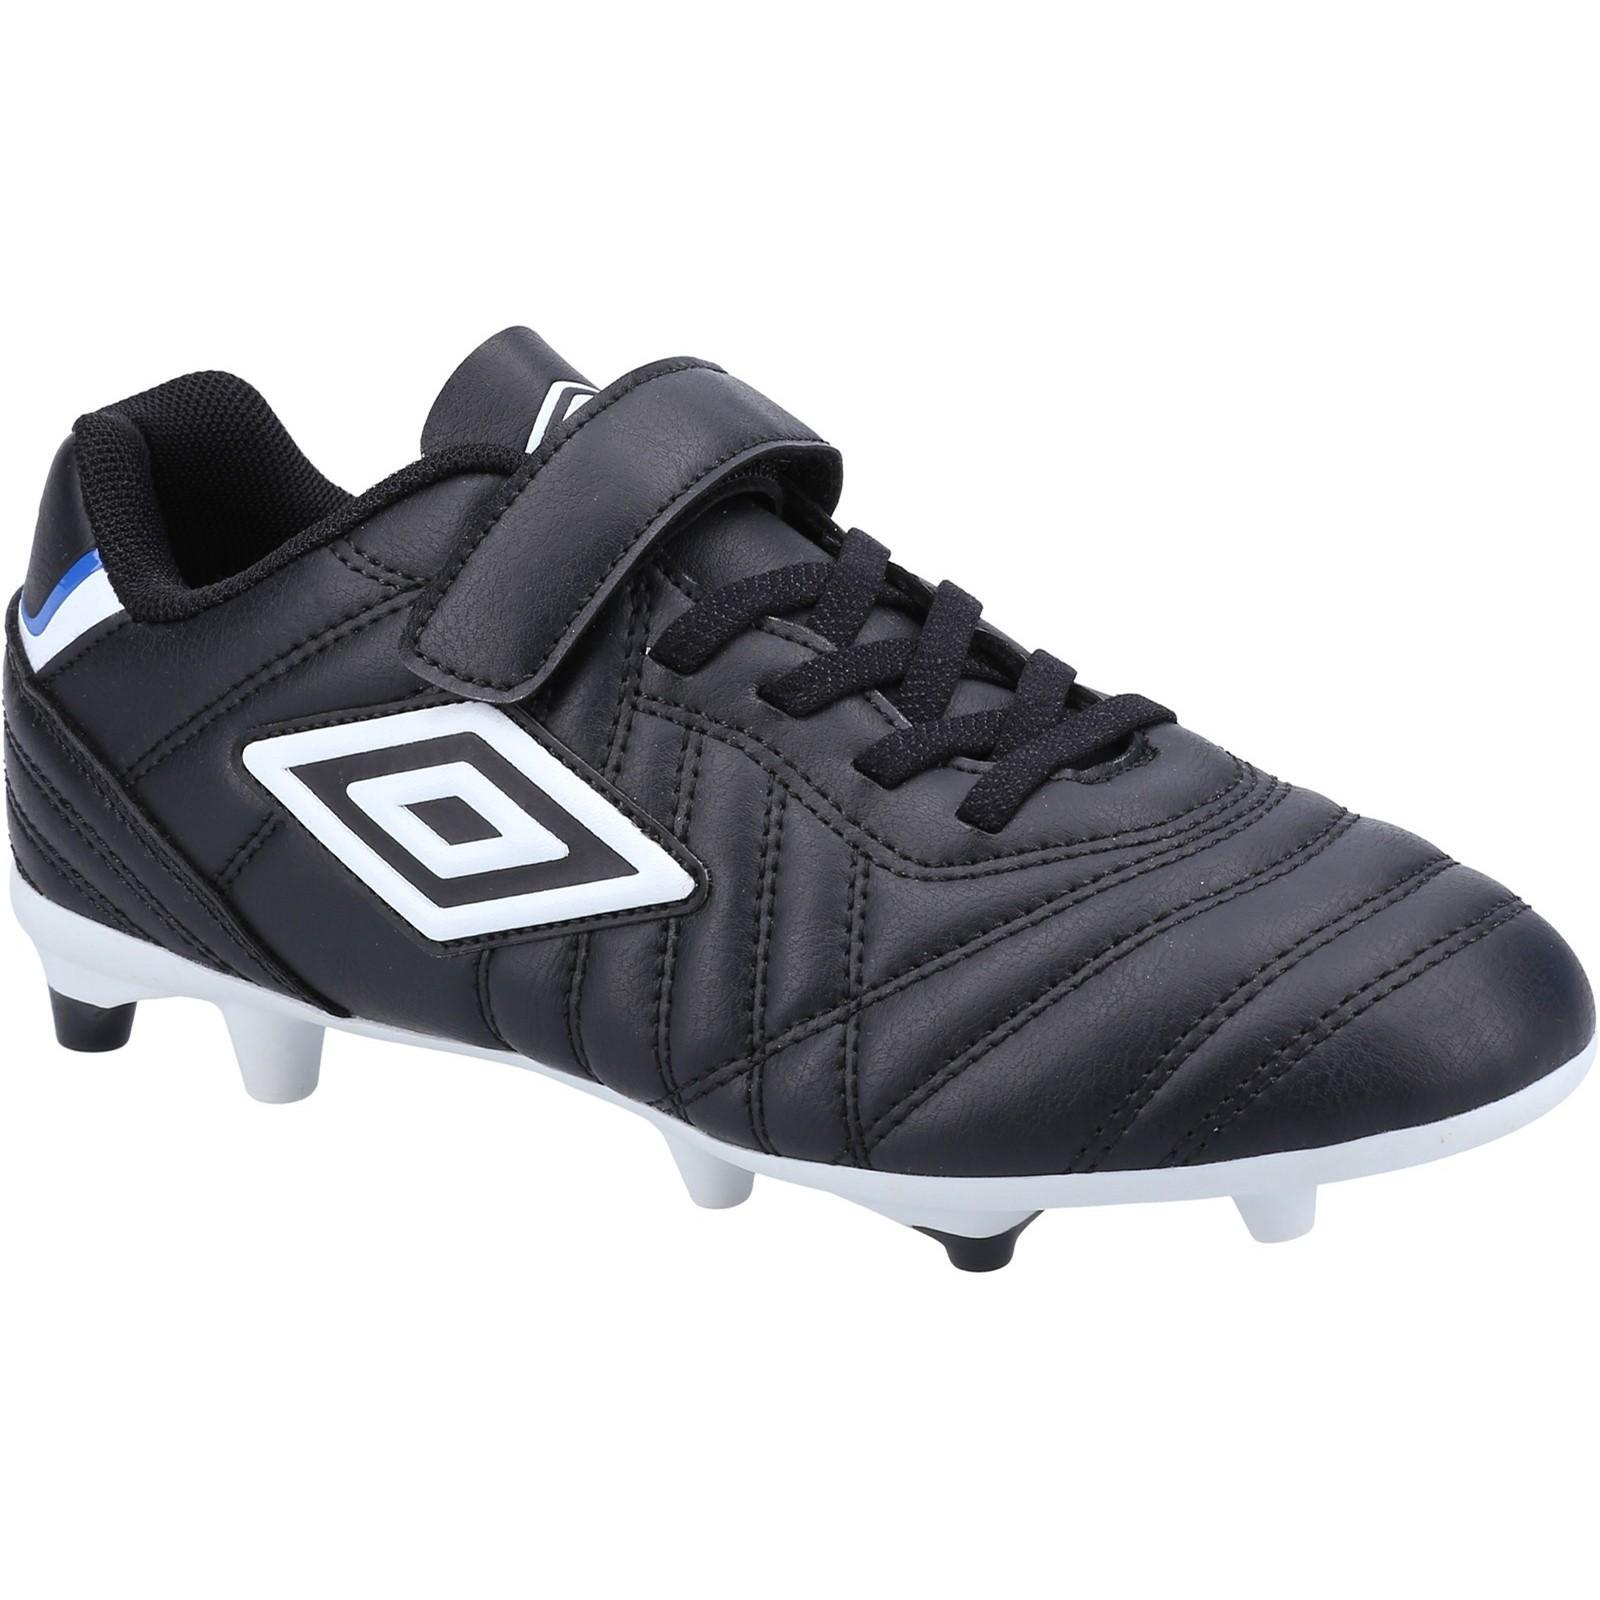 Childrens/Kids Speciali Liga Firm Leather Football Boots (Black/White) 1/4